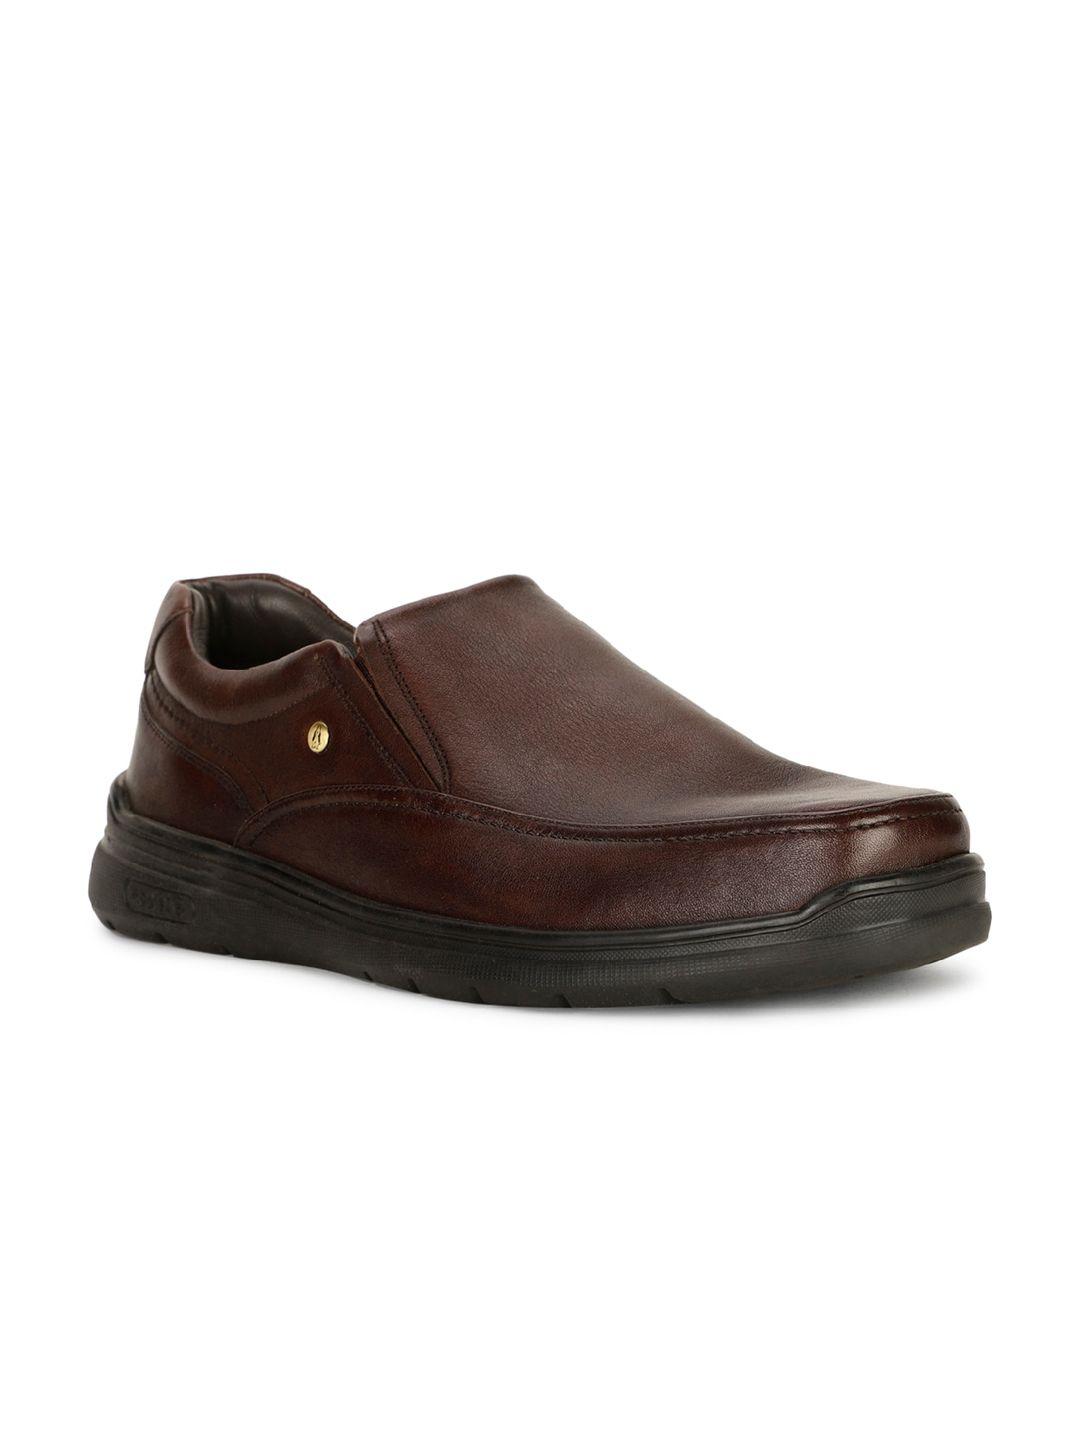 hush-puppies-men-leather-slip-on-formal--shoes